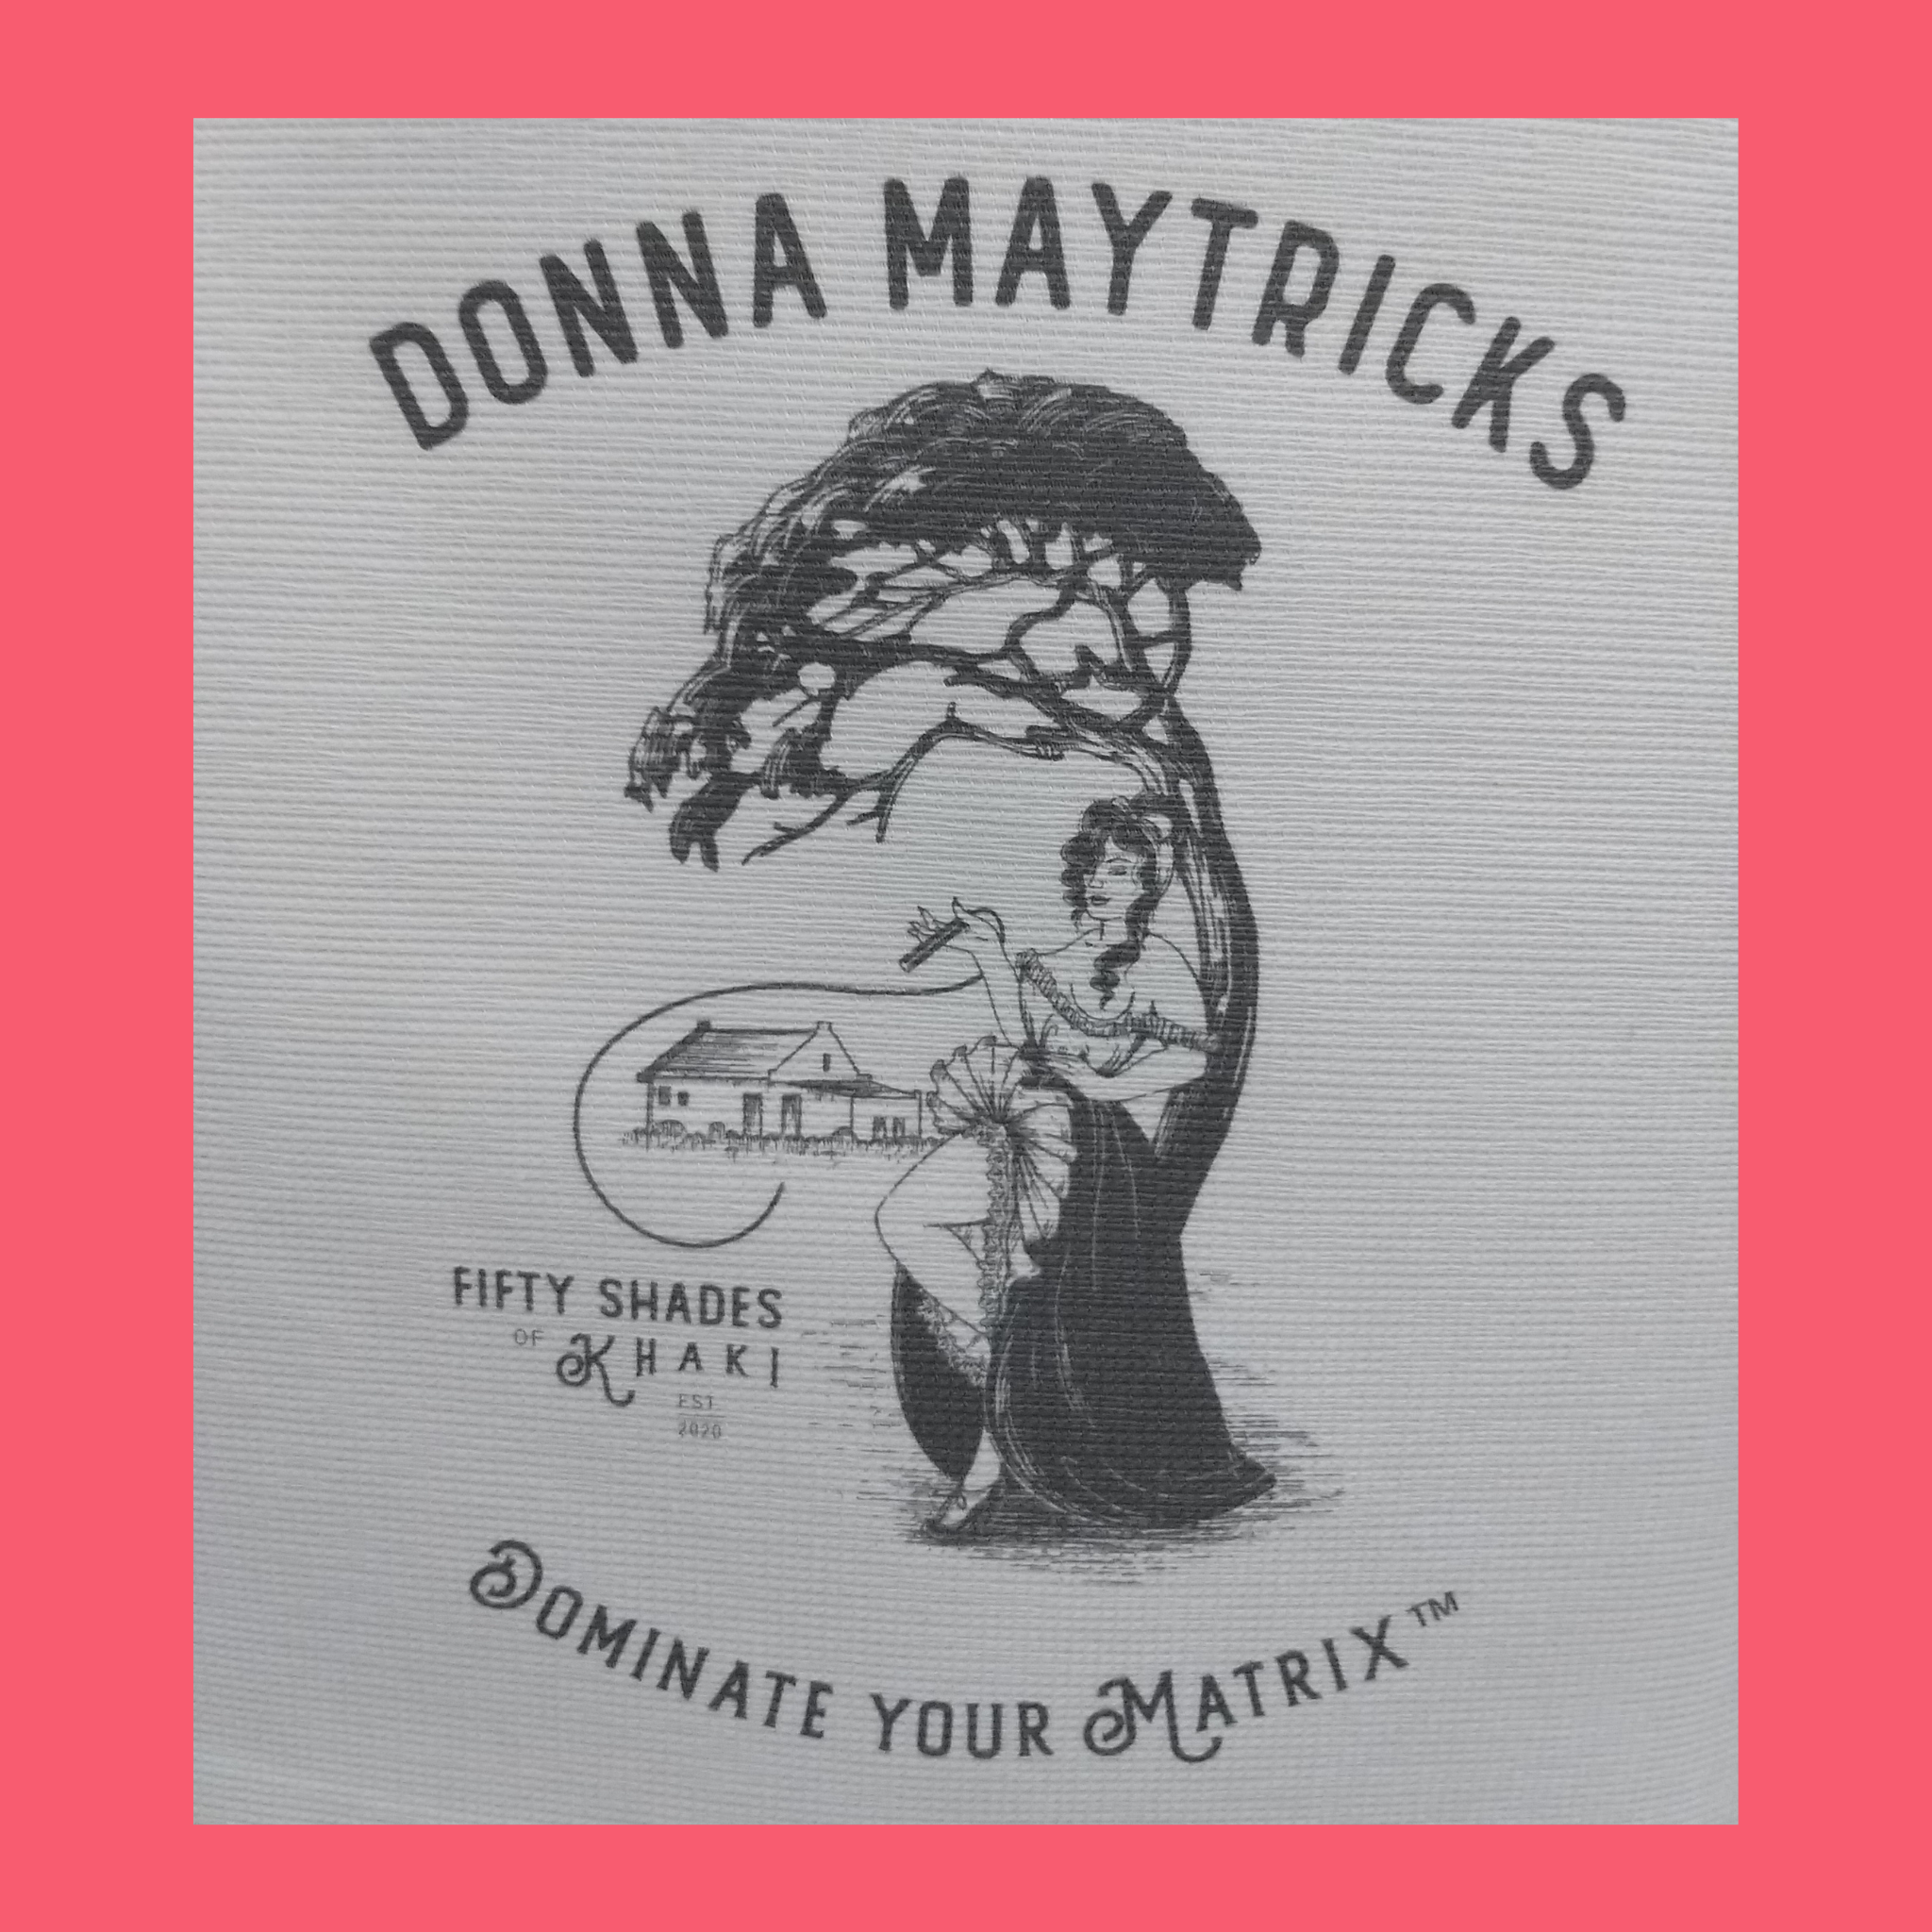 'DOMINATE YOUR MATRIX' - DONNA MAYTRICK Tote Shopping Bag